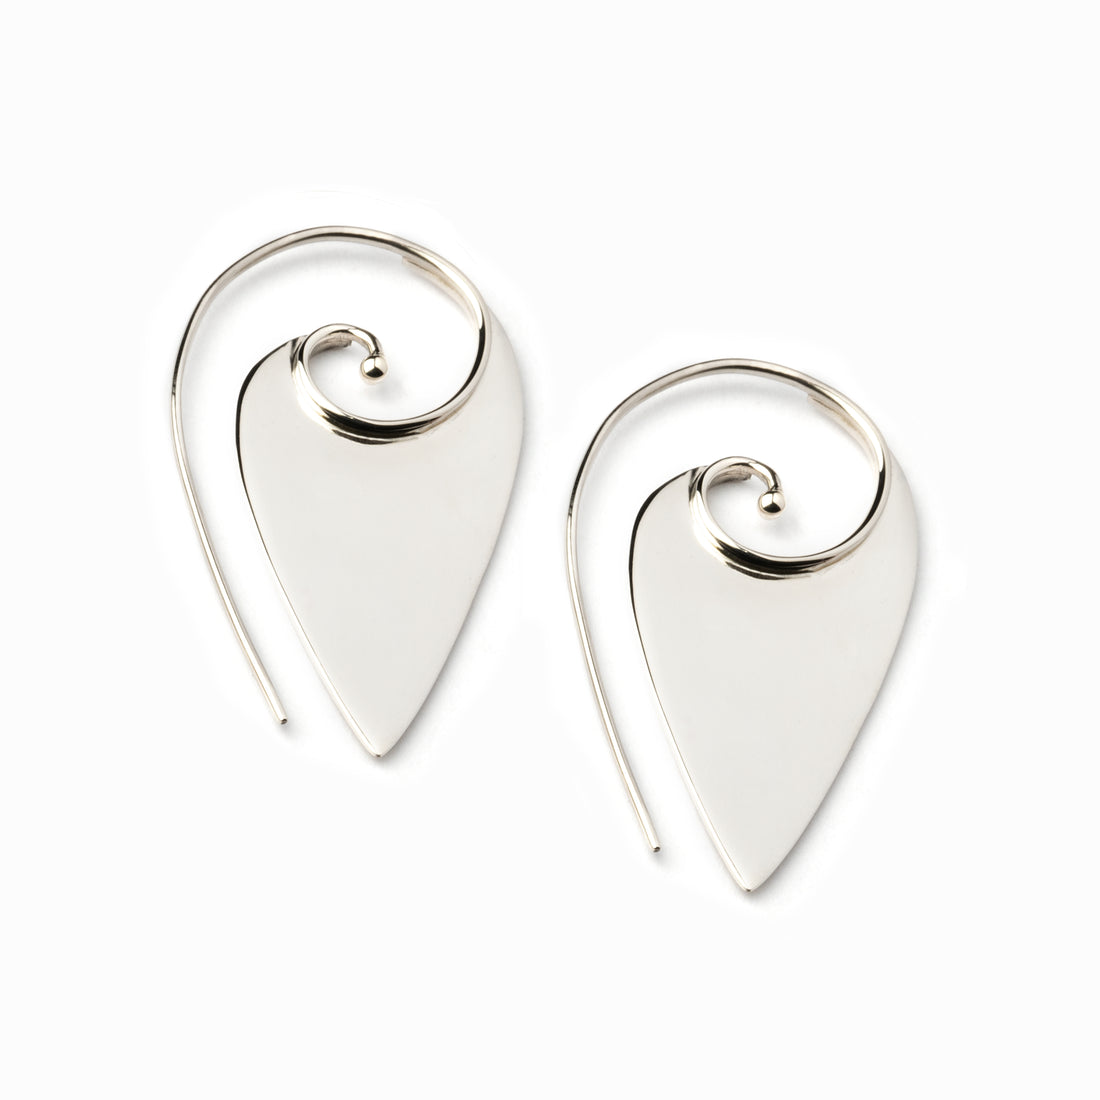 Silver Pointed Spiral Earrings